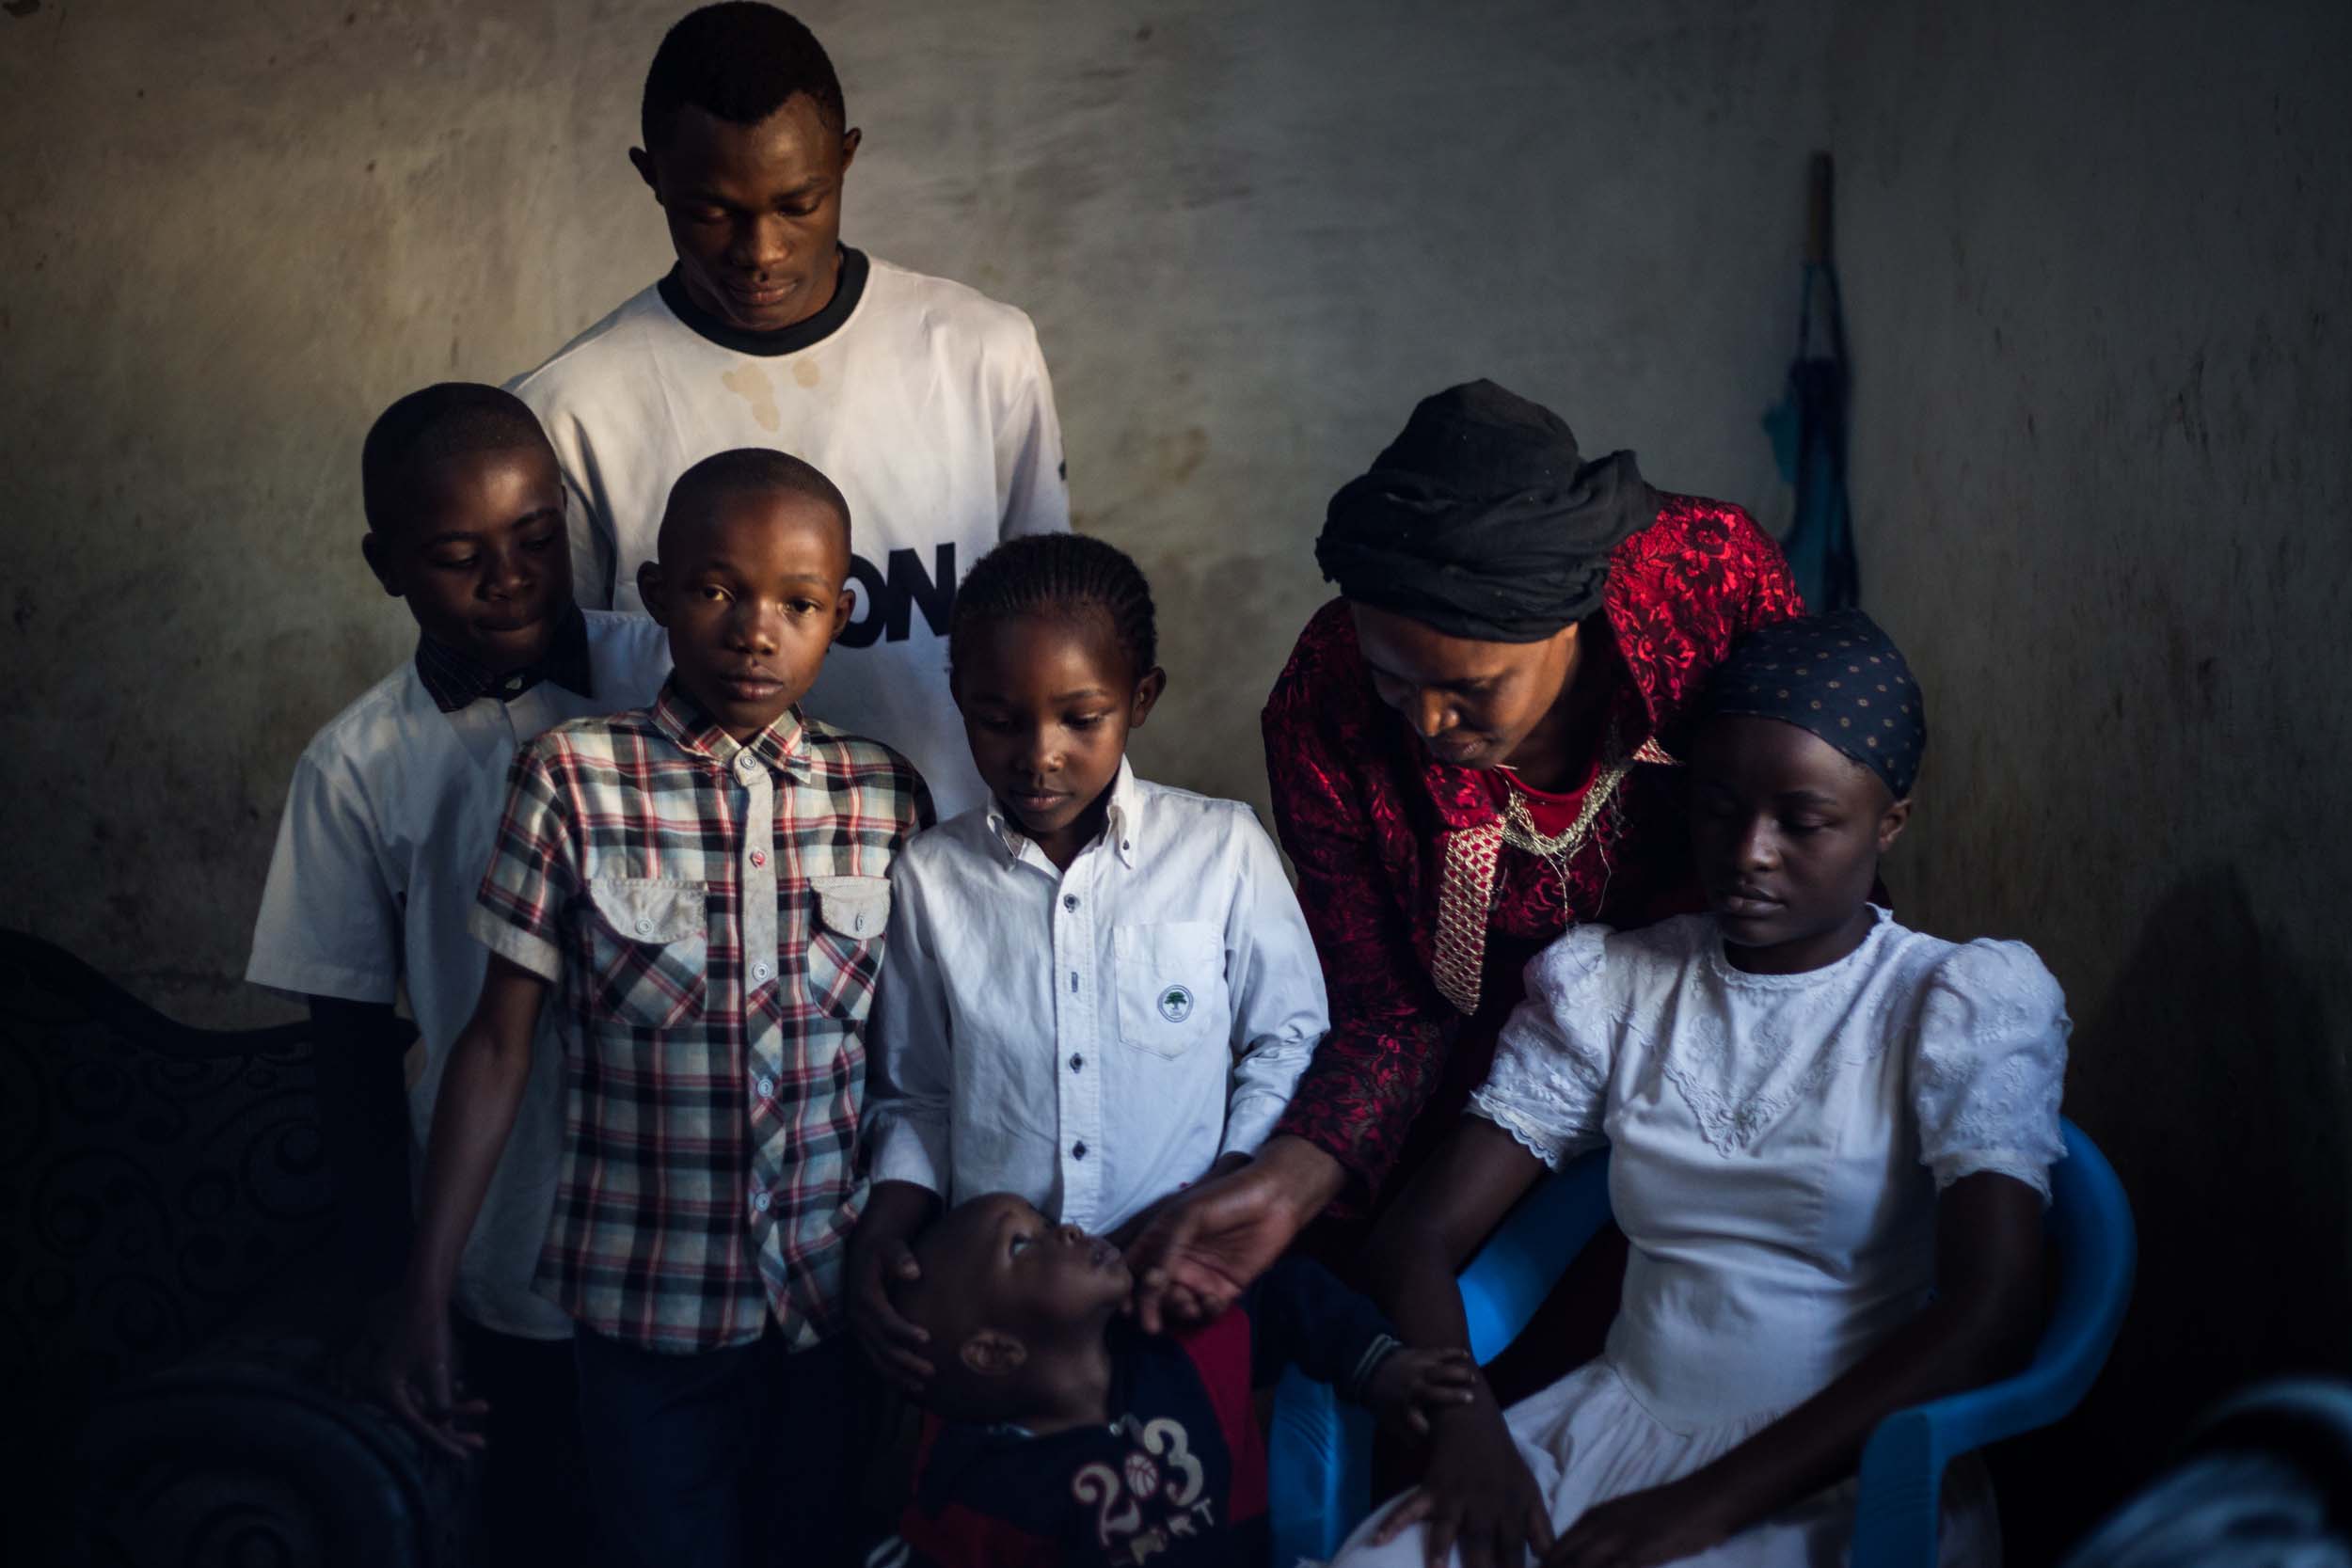  Adele Masengo, 41, and her children live in Lubumbashi, Congo. She had two babies with severe birth defects and her oldest daughter became blind at the age of 12. Her husband works in an artisanal mine. “When my babies were born, they took samples o